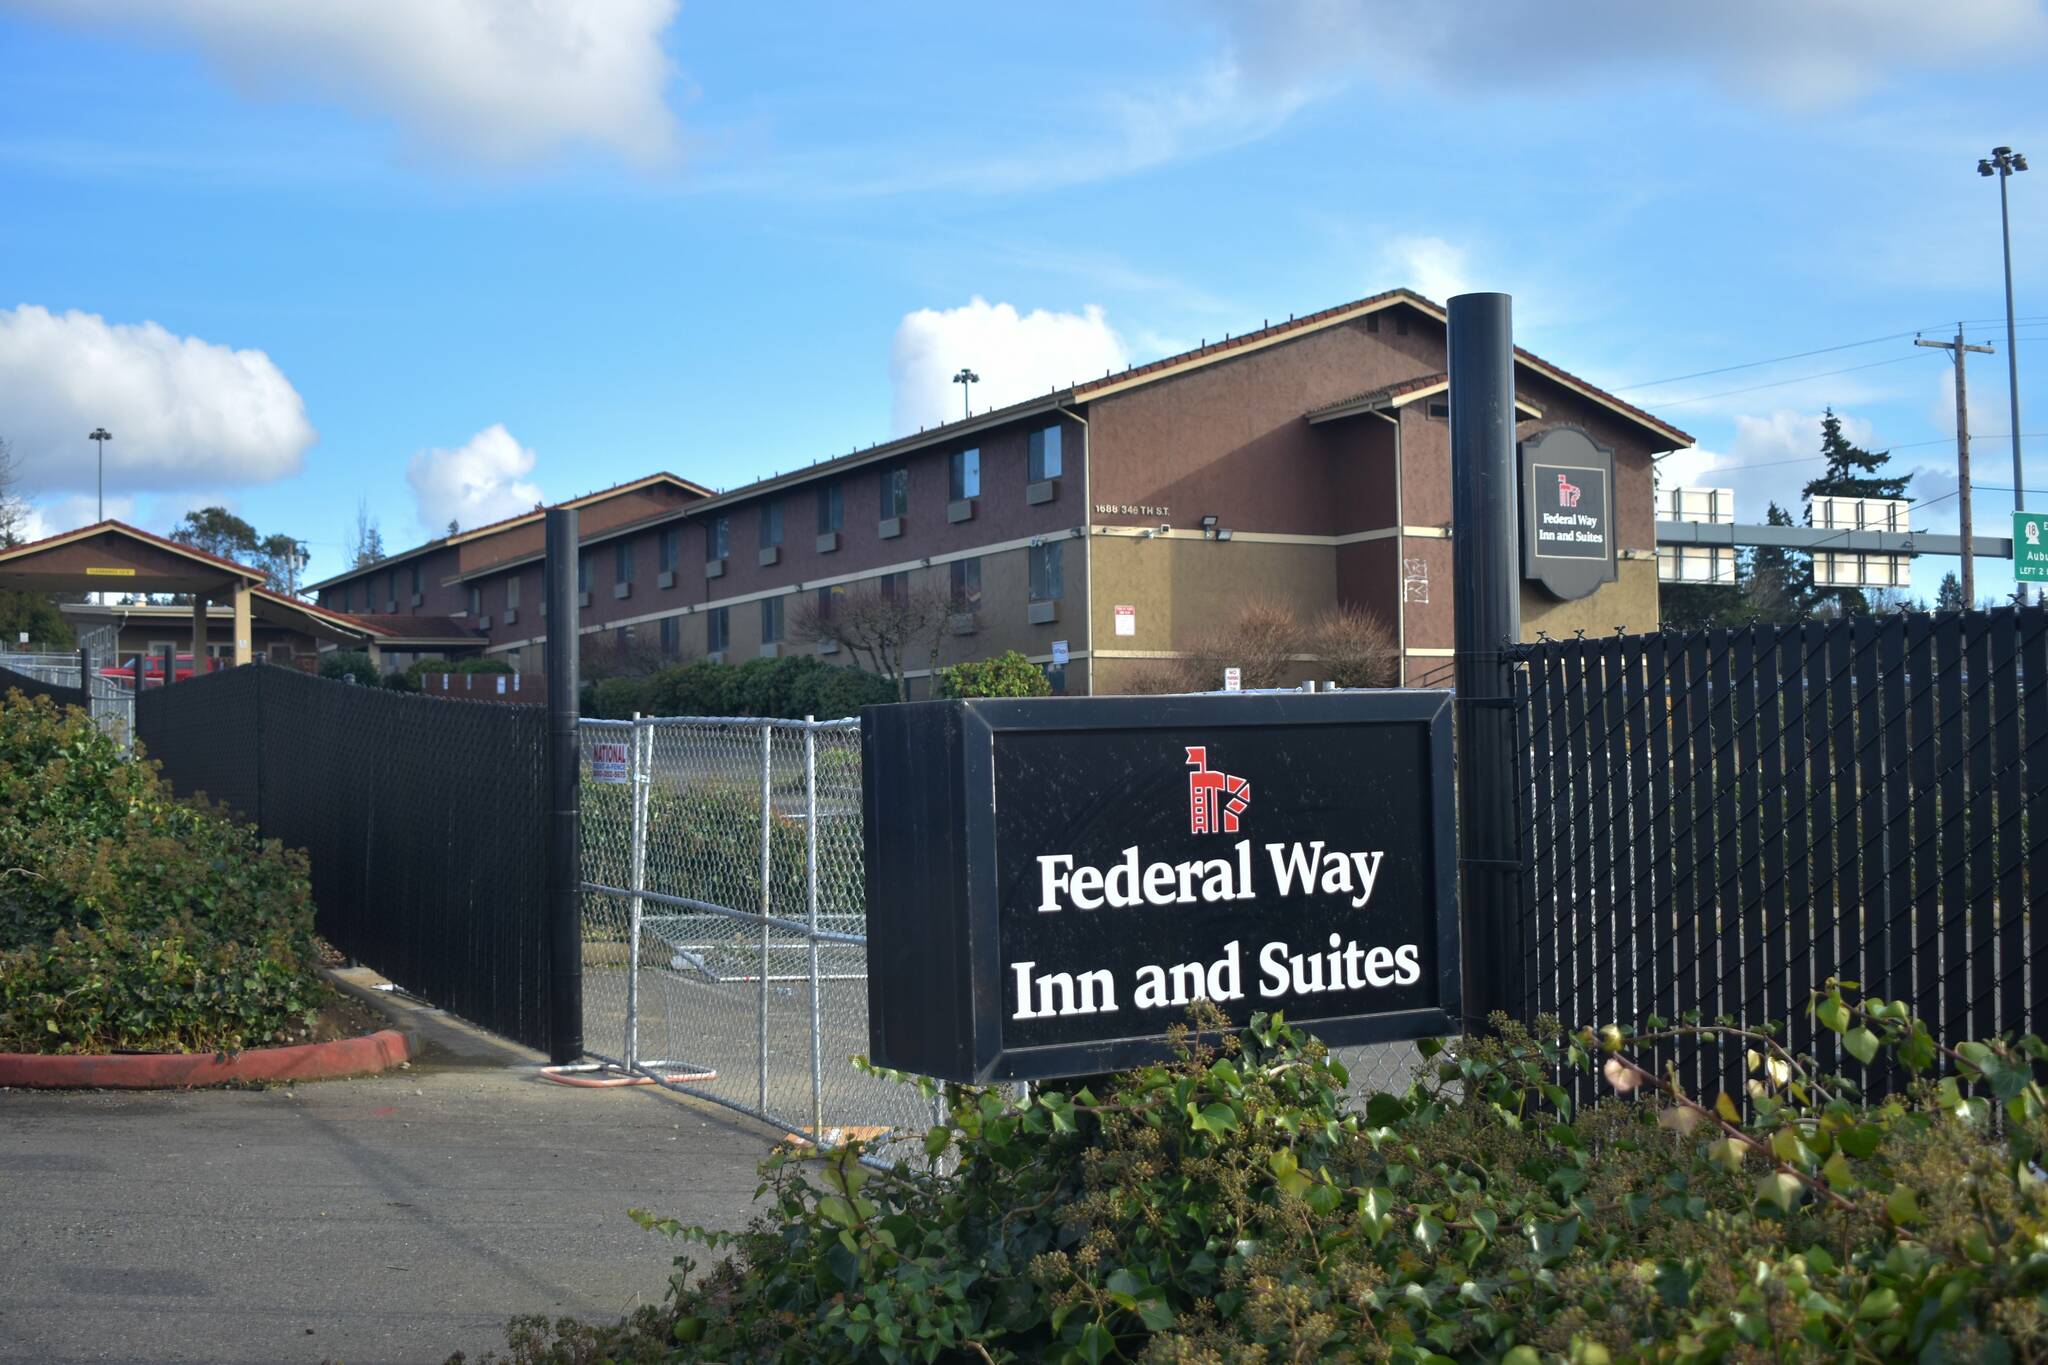 The Federal Way Inn and Suites at 1688 S. 348th St., which was formerly the Red Lion hotel. Photo taken in February 2023. (Sound Publishing file photo)